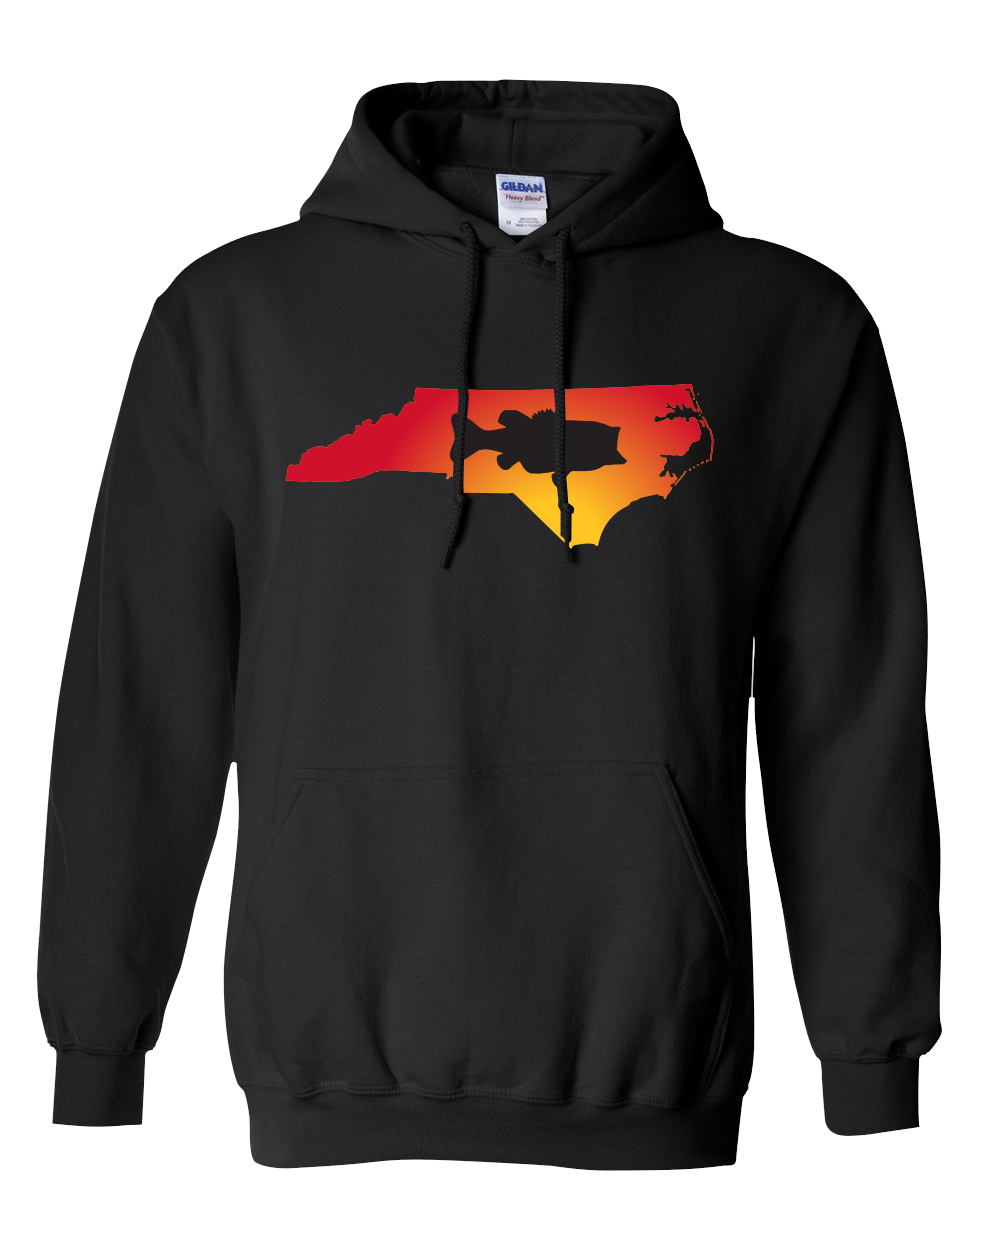 Pullover Hooded Sweatshirt North Carolina Black Large Mouth Bass Vibrant Design High Quality Tight Knit Ring Spun Low Maintenance Cotton Printed With The Newest Available Color Transfer Technology